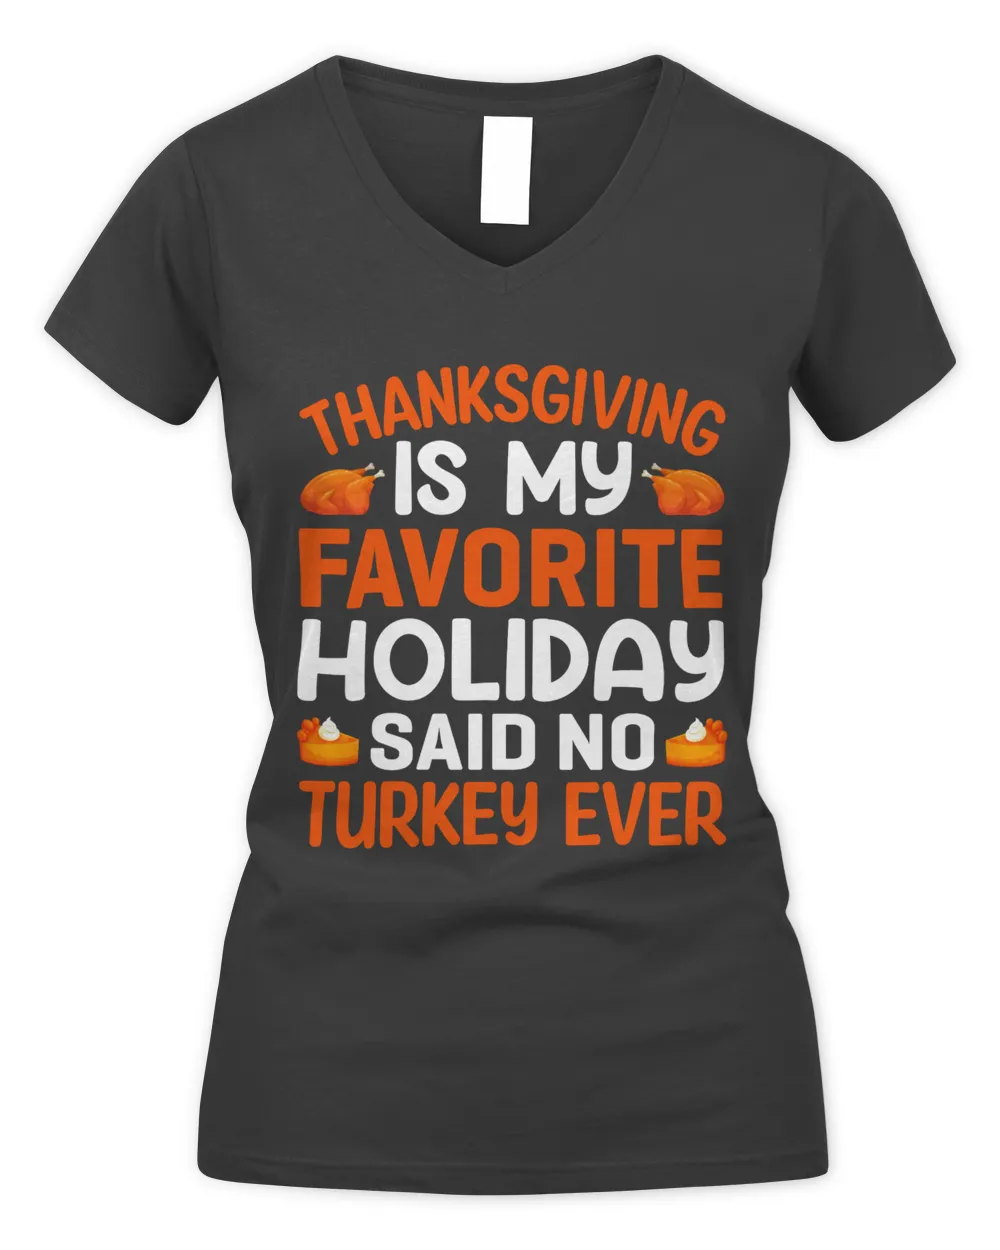 Thanksgiving is my favorite holiday say no turkey ever